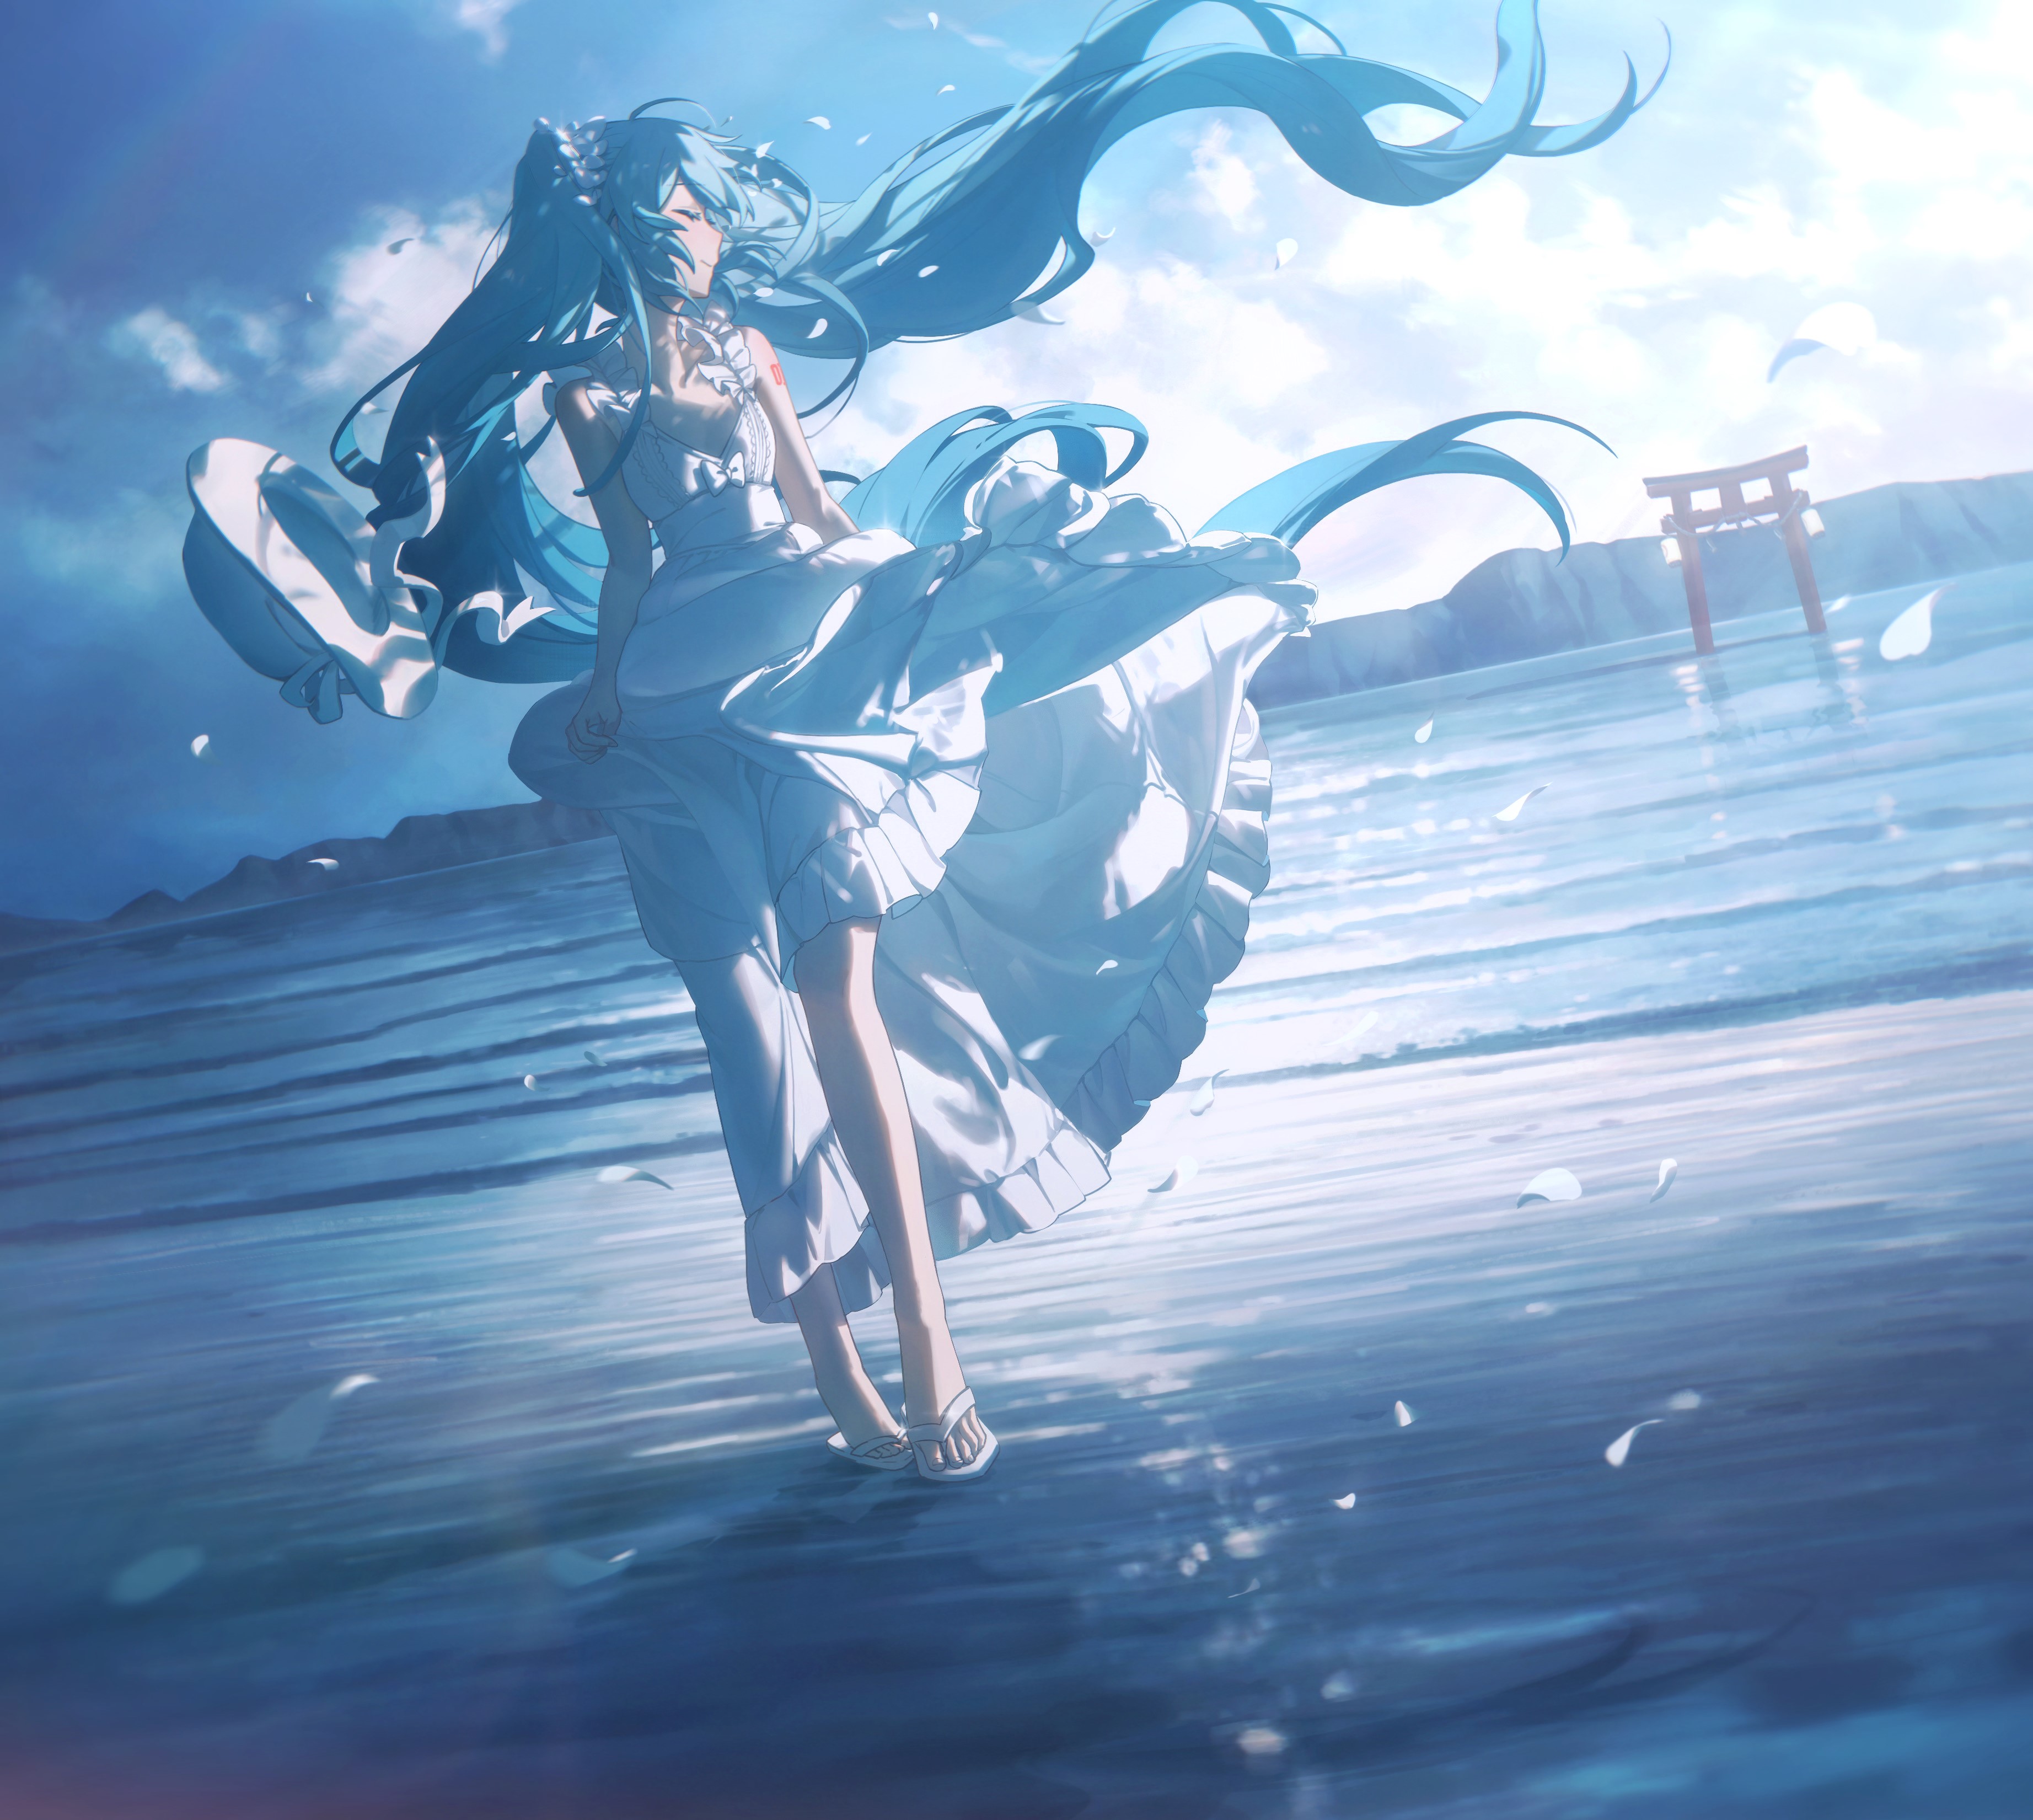 Anime 3687x3300 anime anime girls Hatsune Miku Vocaloid long hair twintails closed eyes water hair blowing in the wind torii dress sky clouds